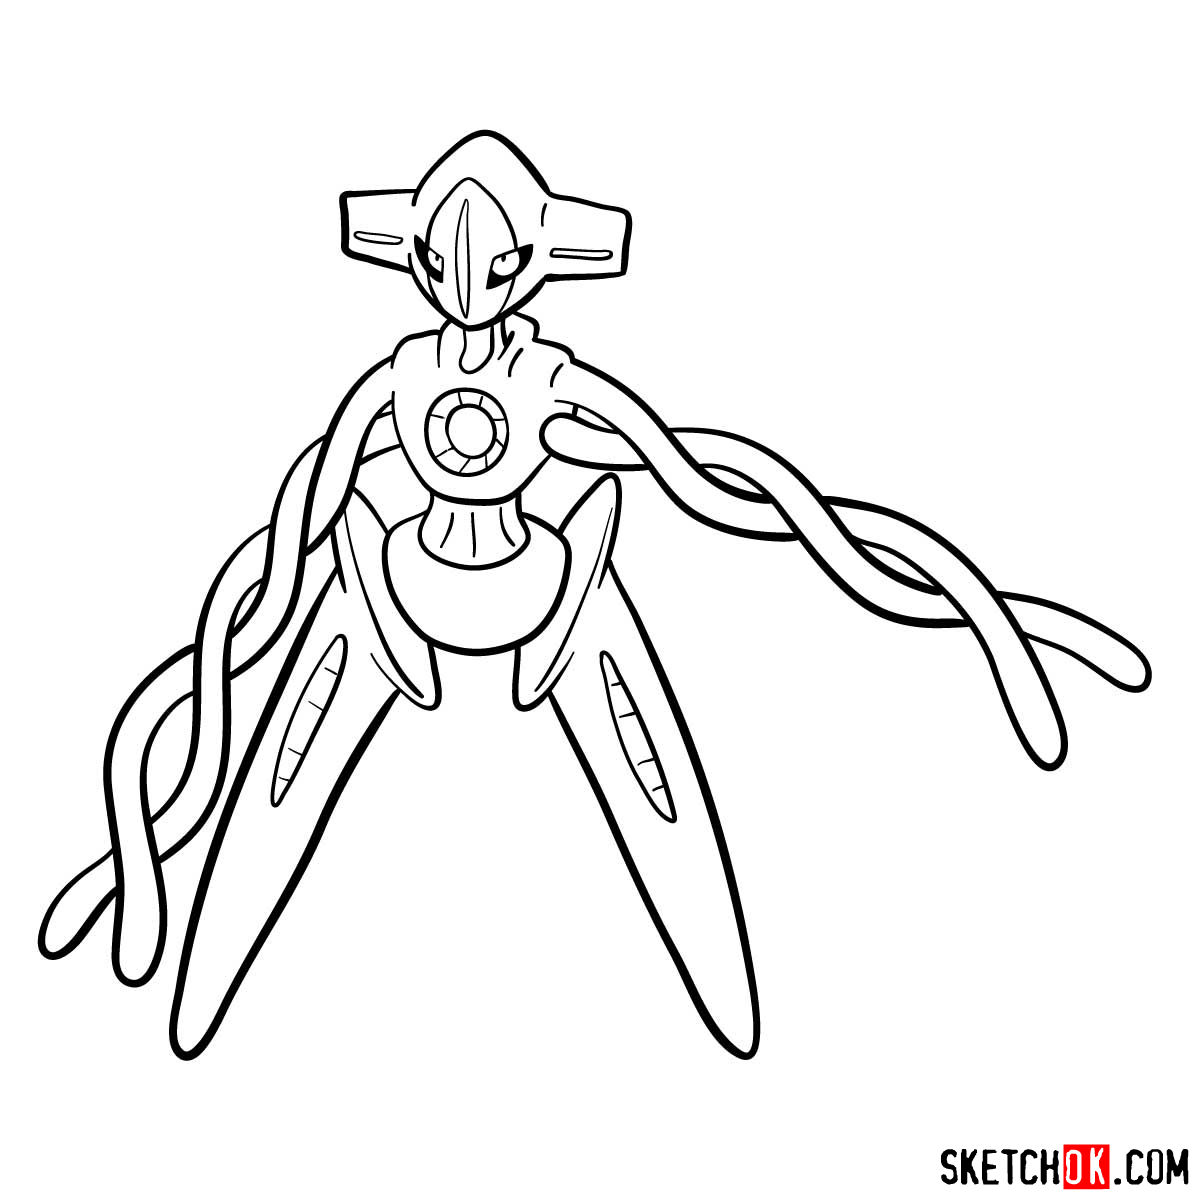 How to draw Deoxys | Pokemon - Step by step drawing tutorials